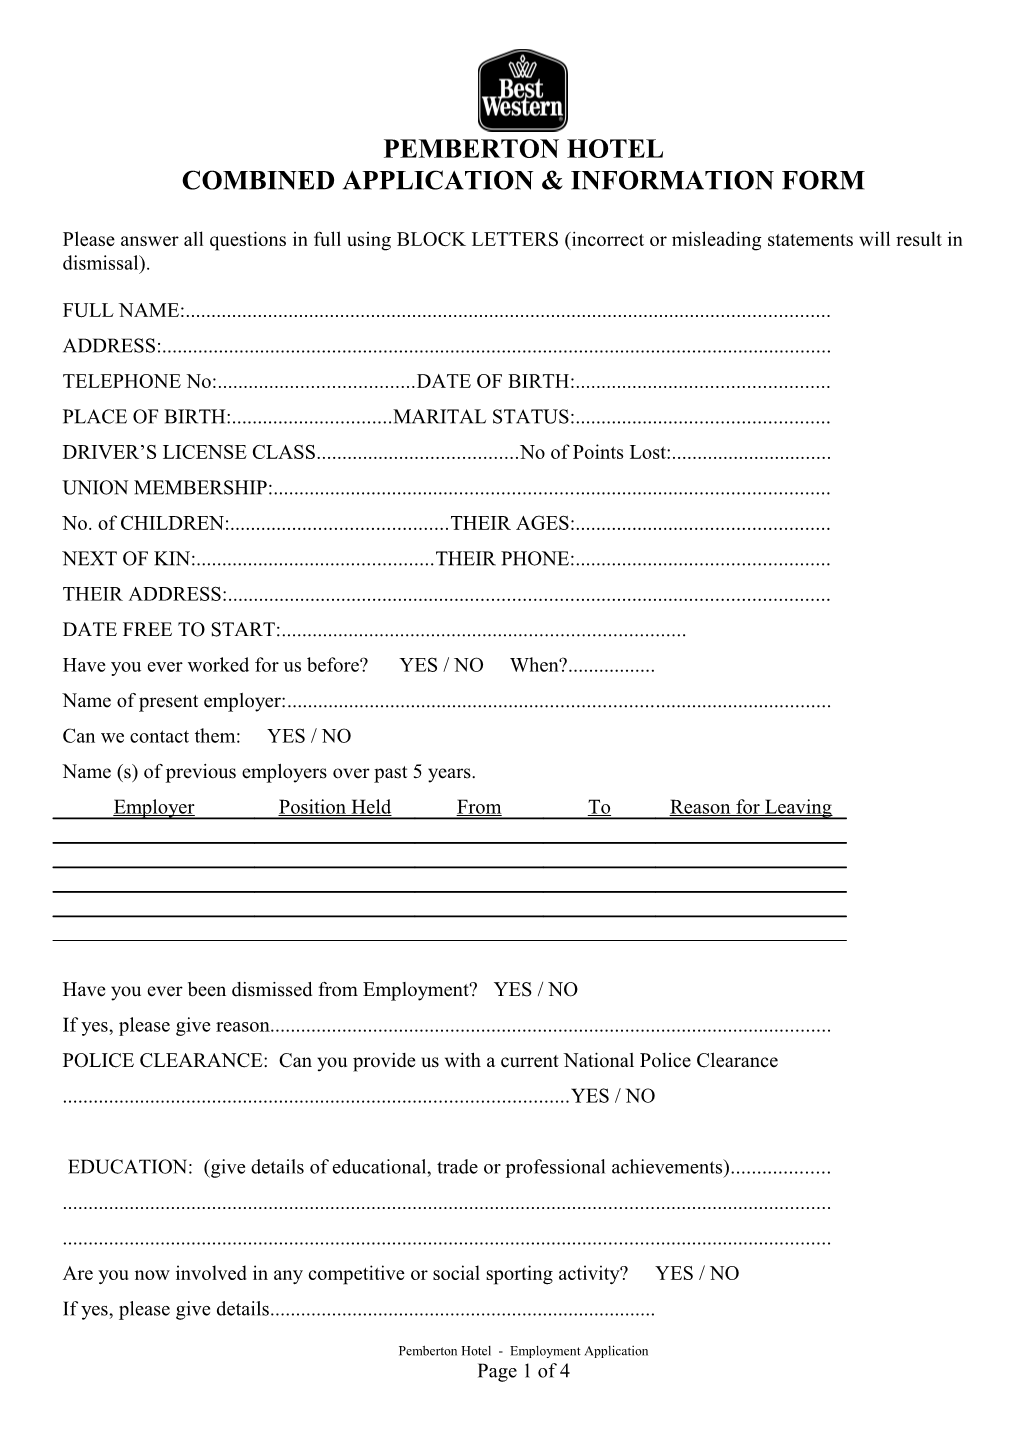 Combined Application & Information Form